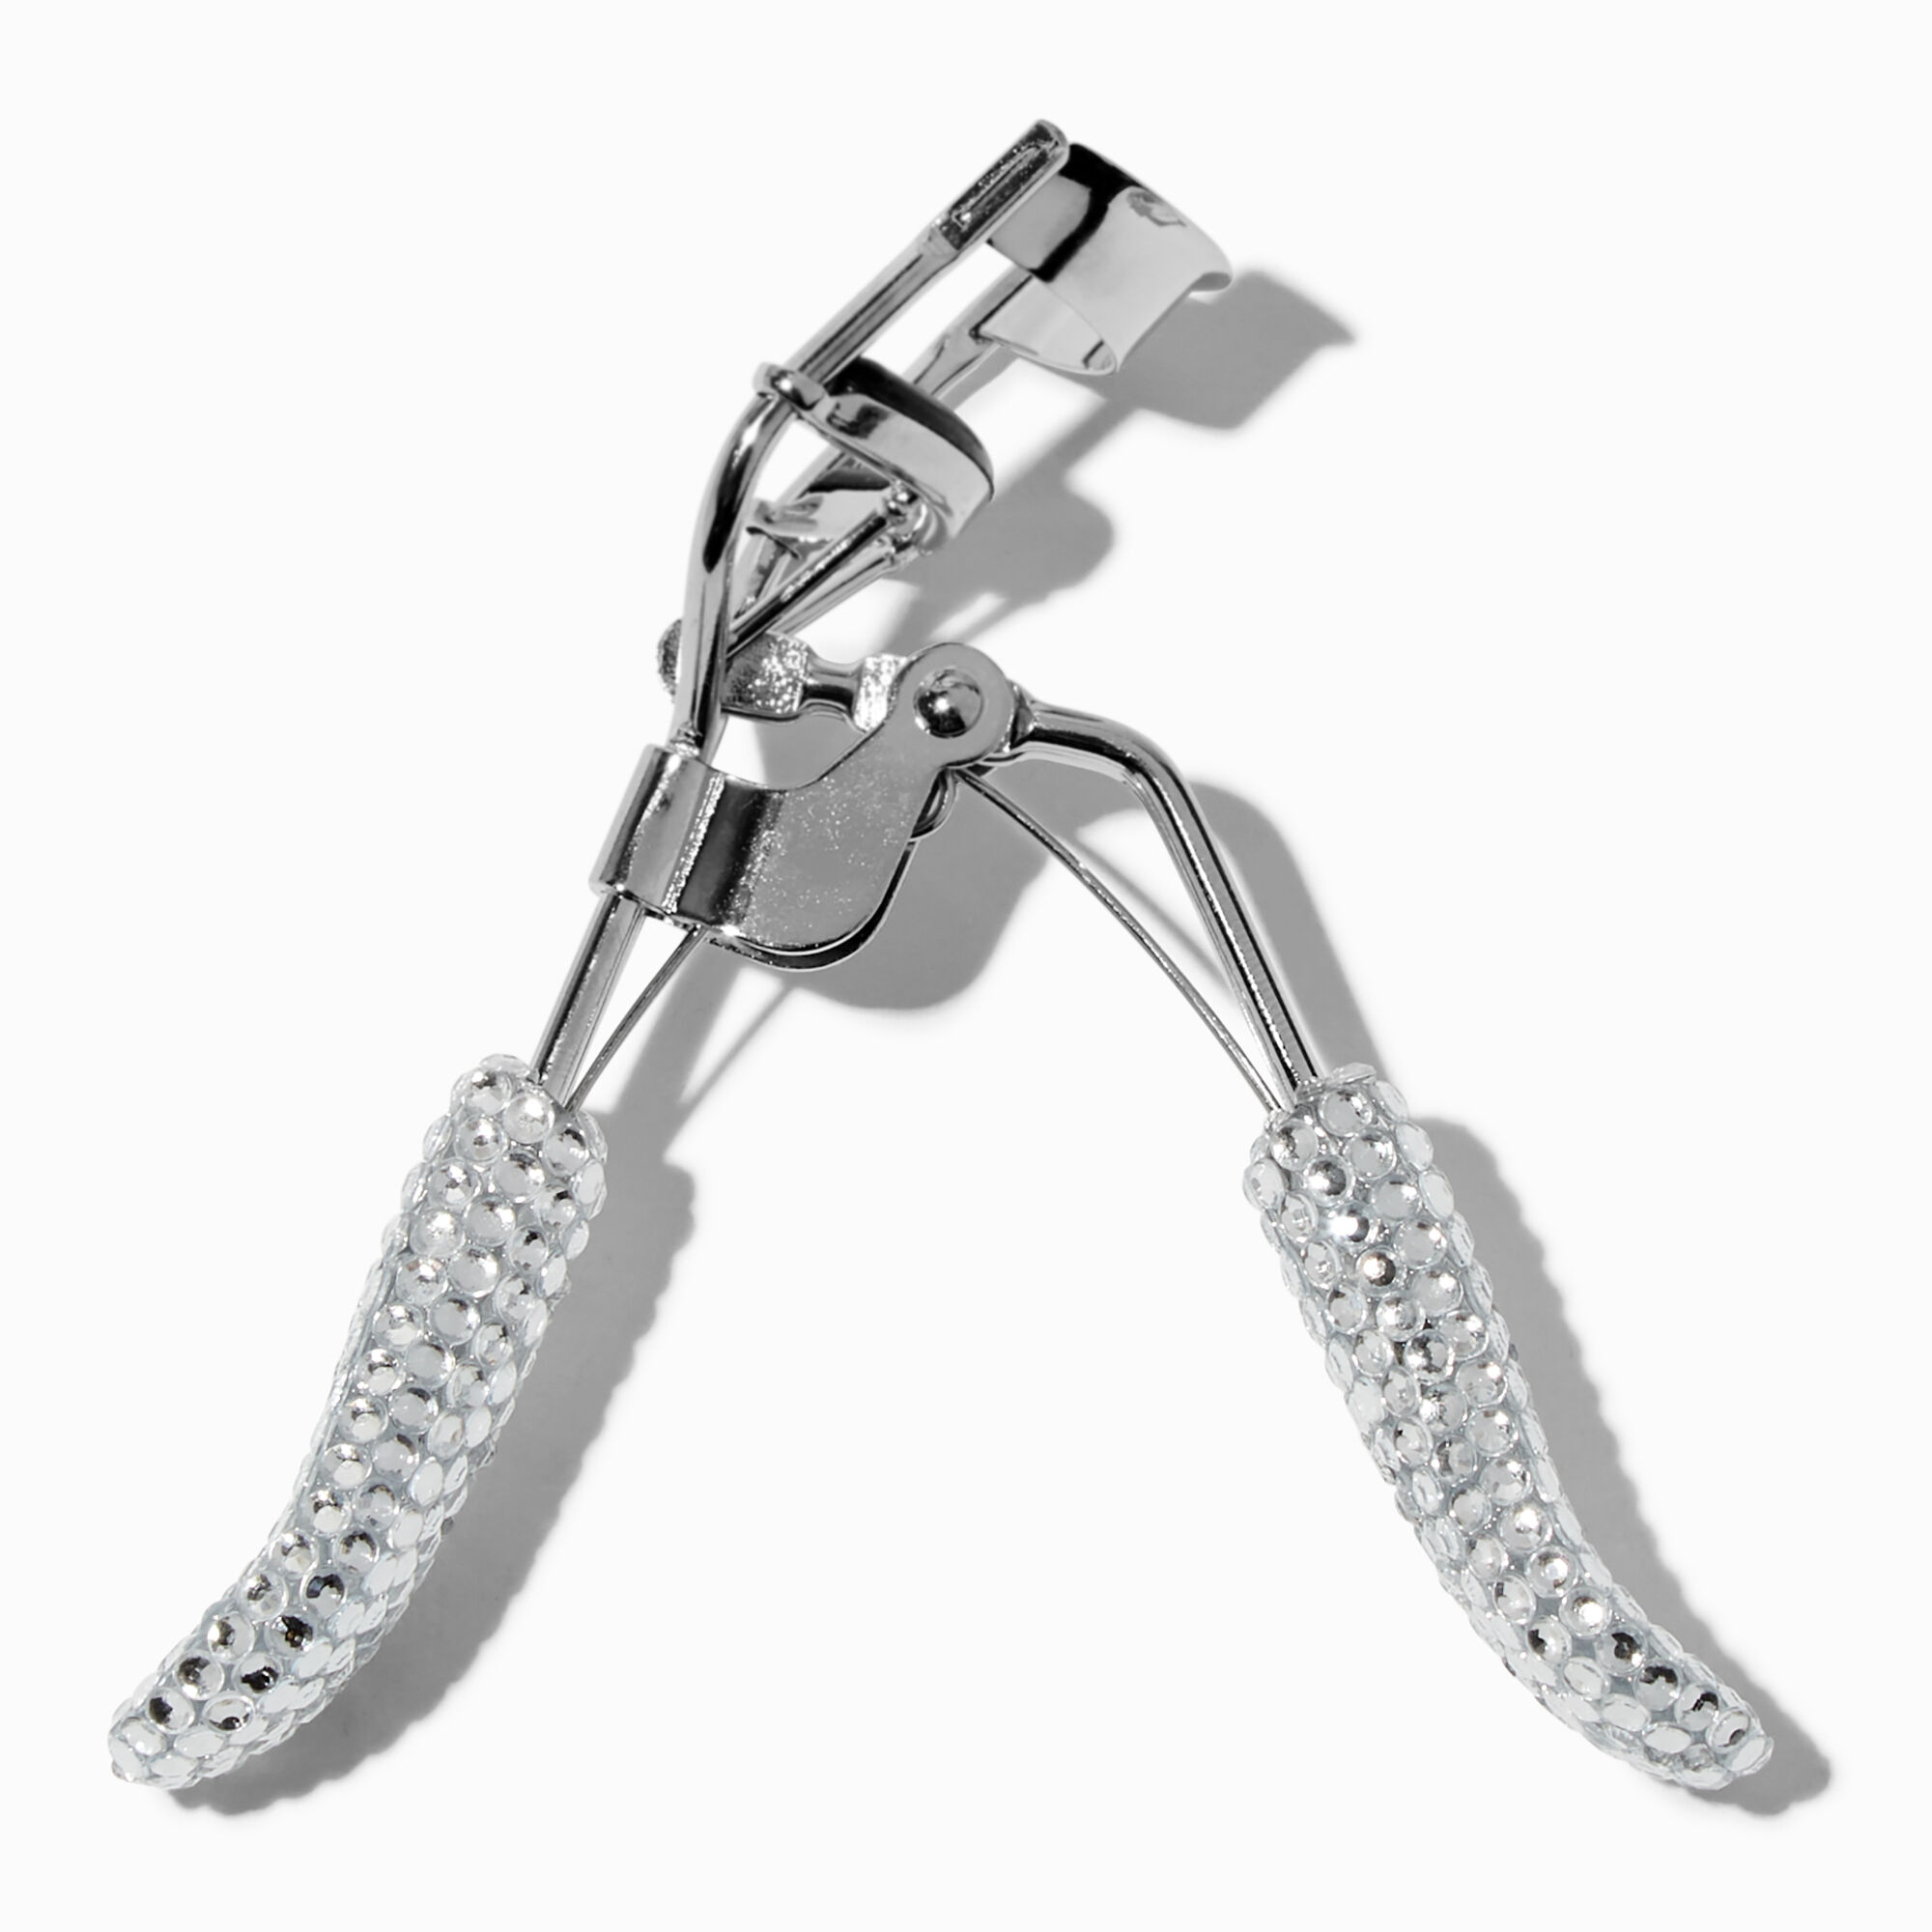 View Claires Bling Eyelash Curler Silver information